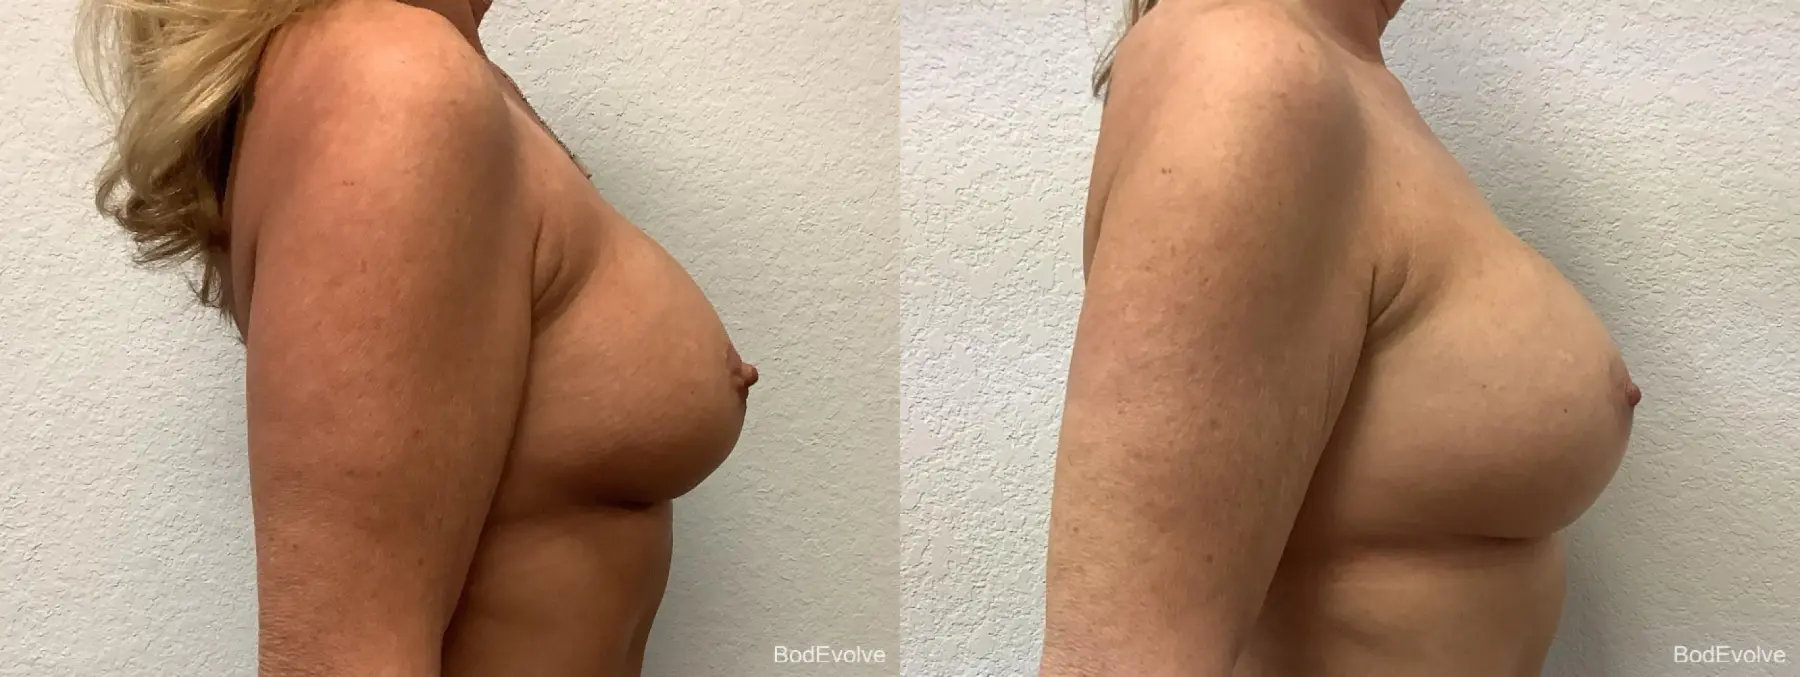 Breast Revision: Patient 1 - Before and After 5